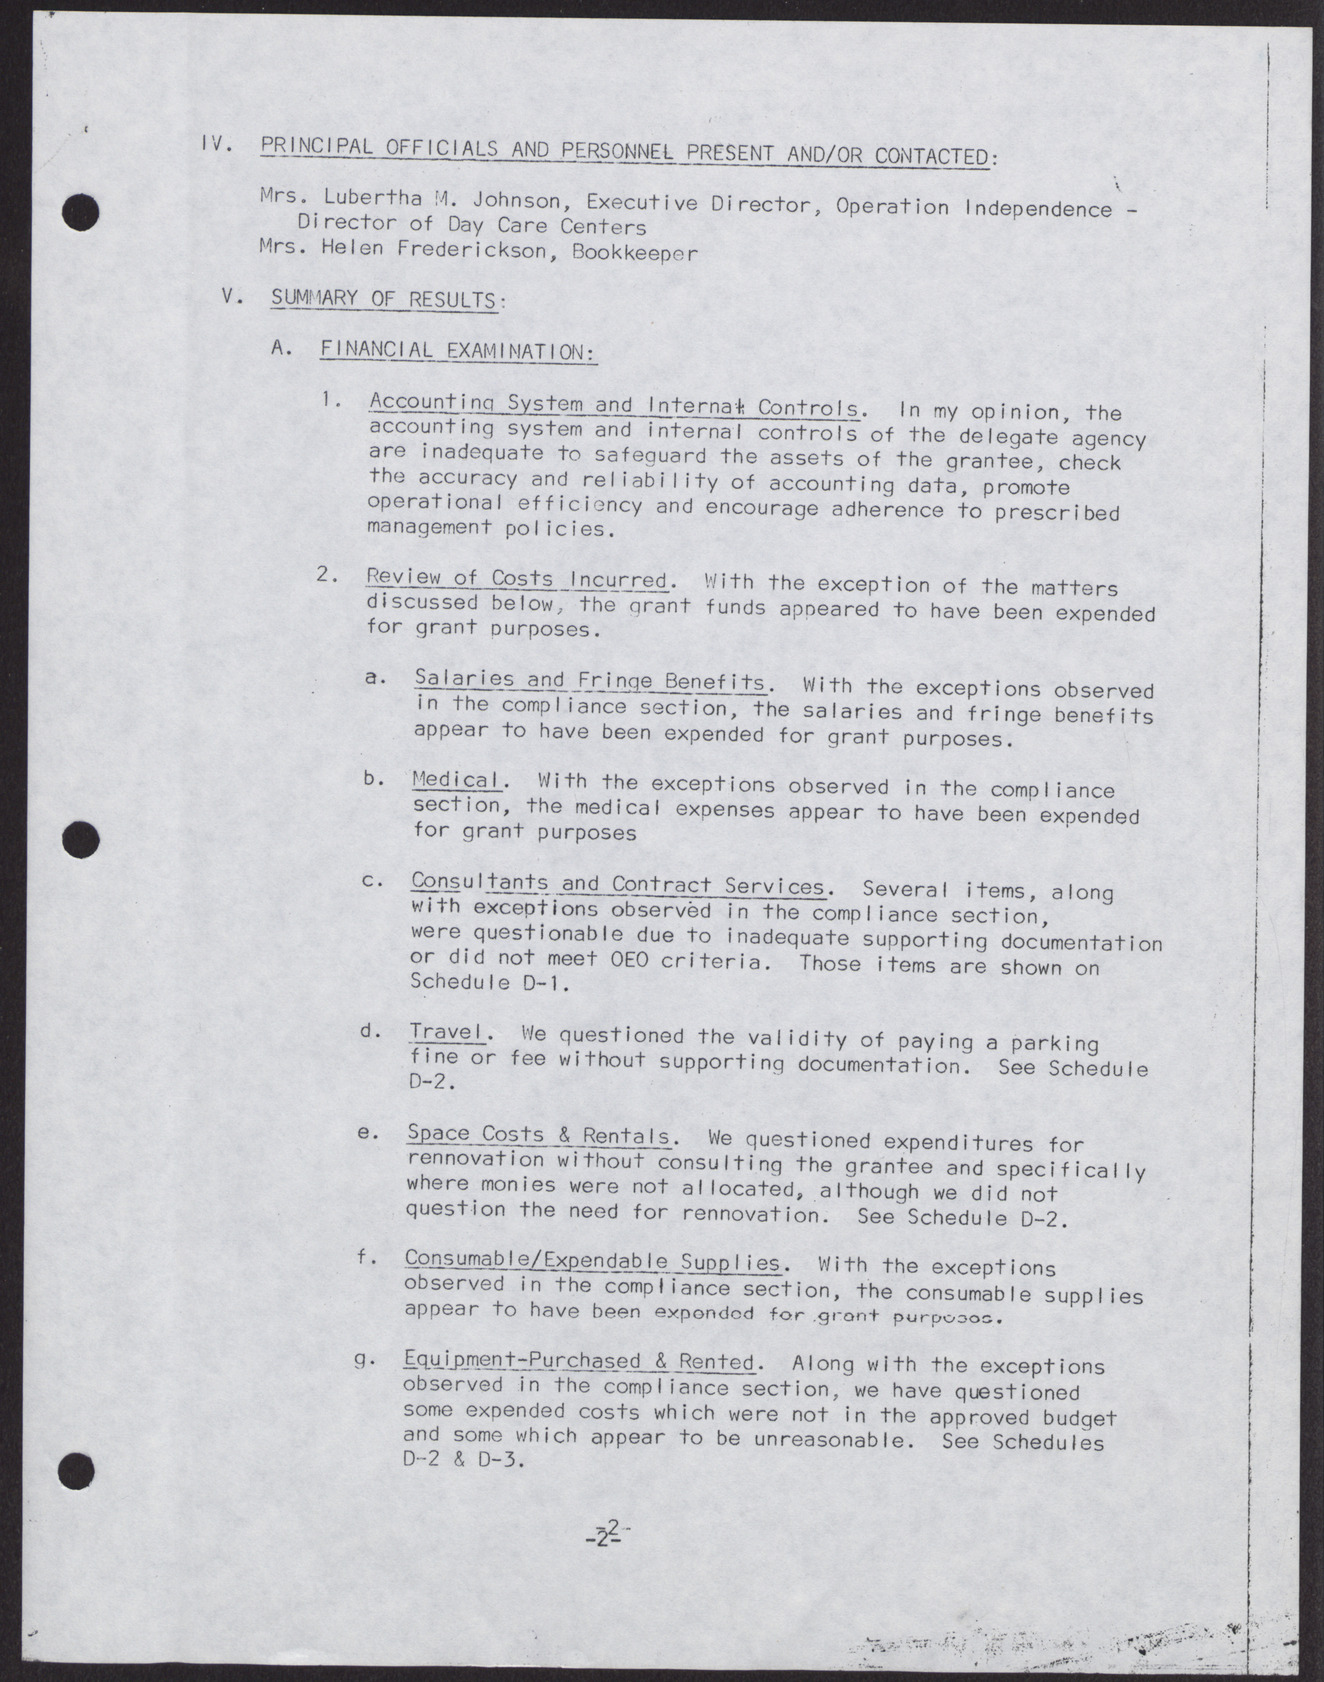 Operation Independence, Inc. Summary of Results of Financial and Compliance Examination; Current General Fund; Funds Received and Disbursed; Budgeted, Uncured, and Questioned Costs (10 pages), December 31, 1966, page 2